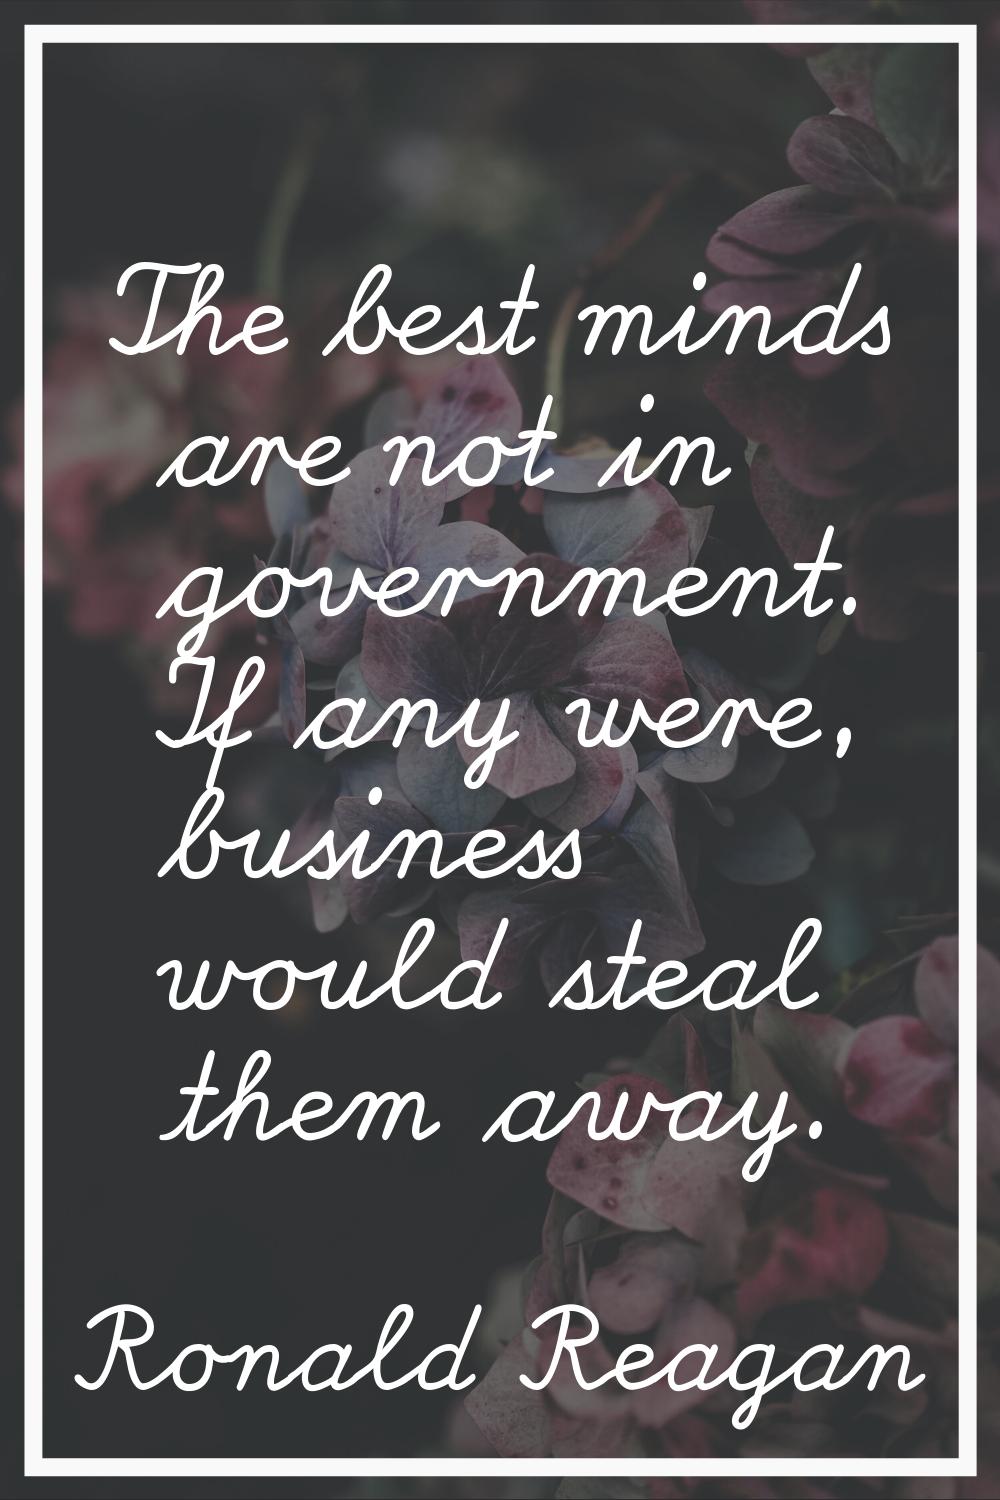 The best minds are not in government. If any were, business would steal them away.